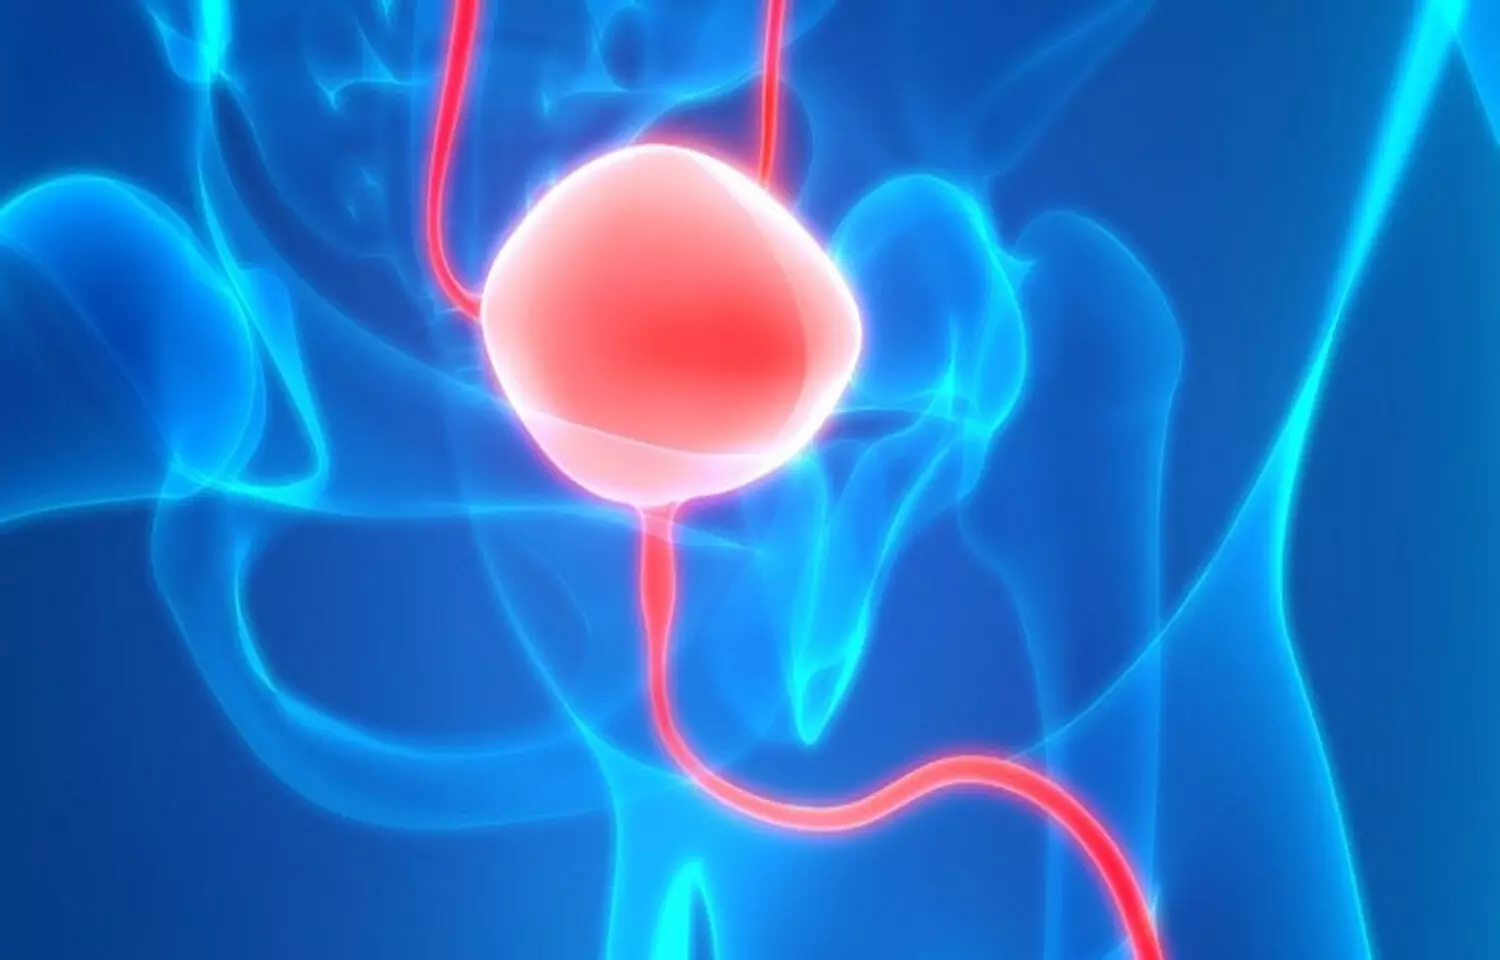 Nephroscopy versus cystoscopy for bladder stones significantly lowers operative time: Study